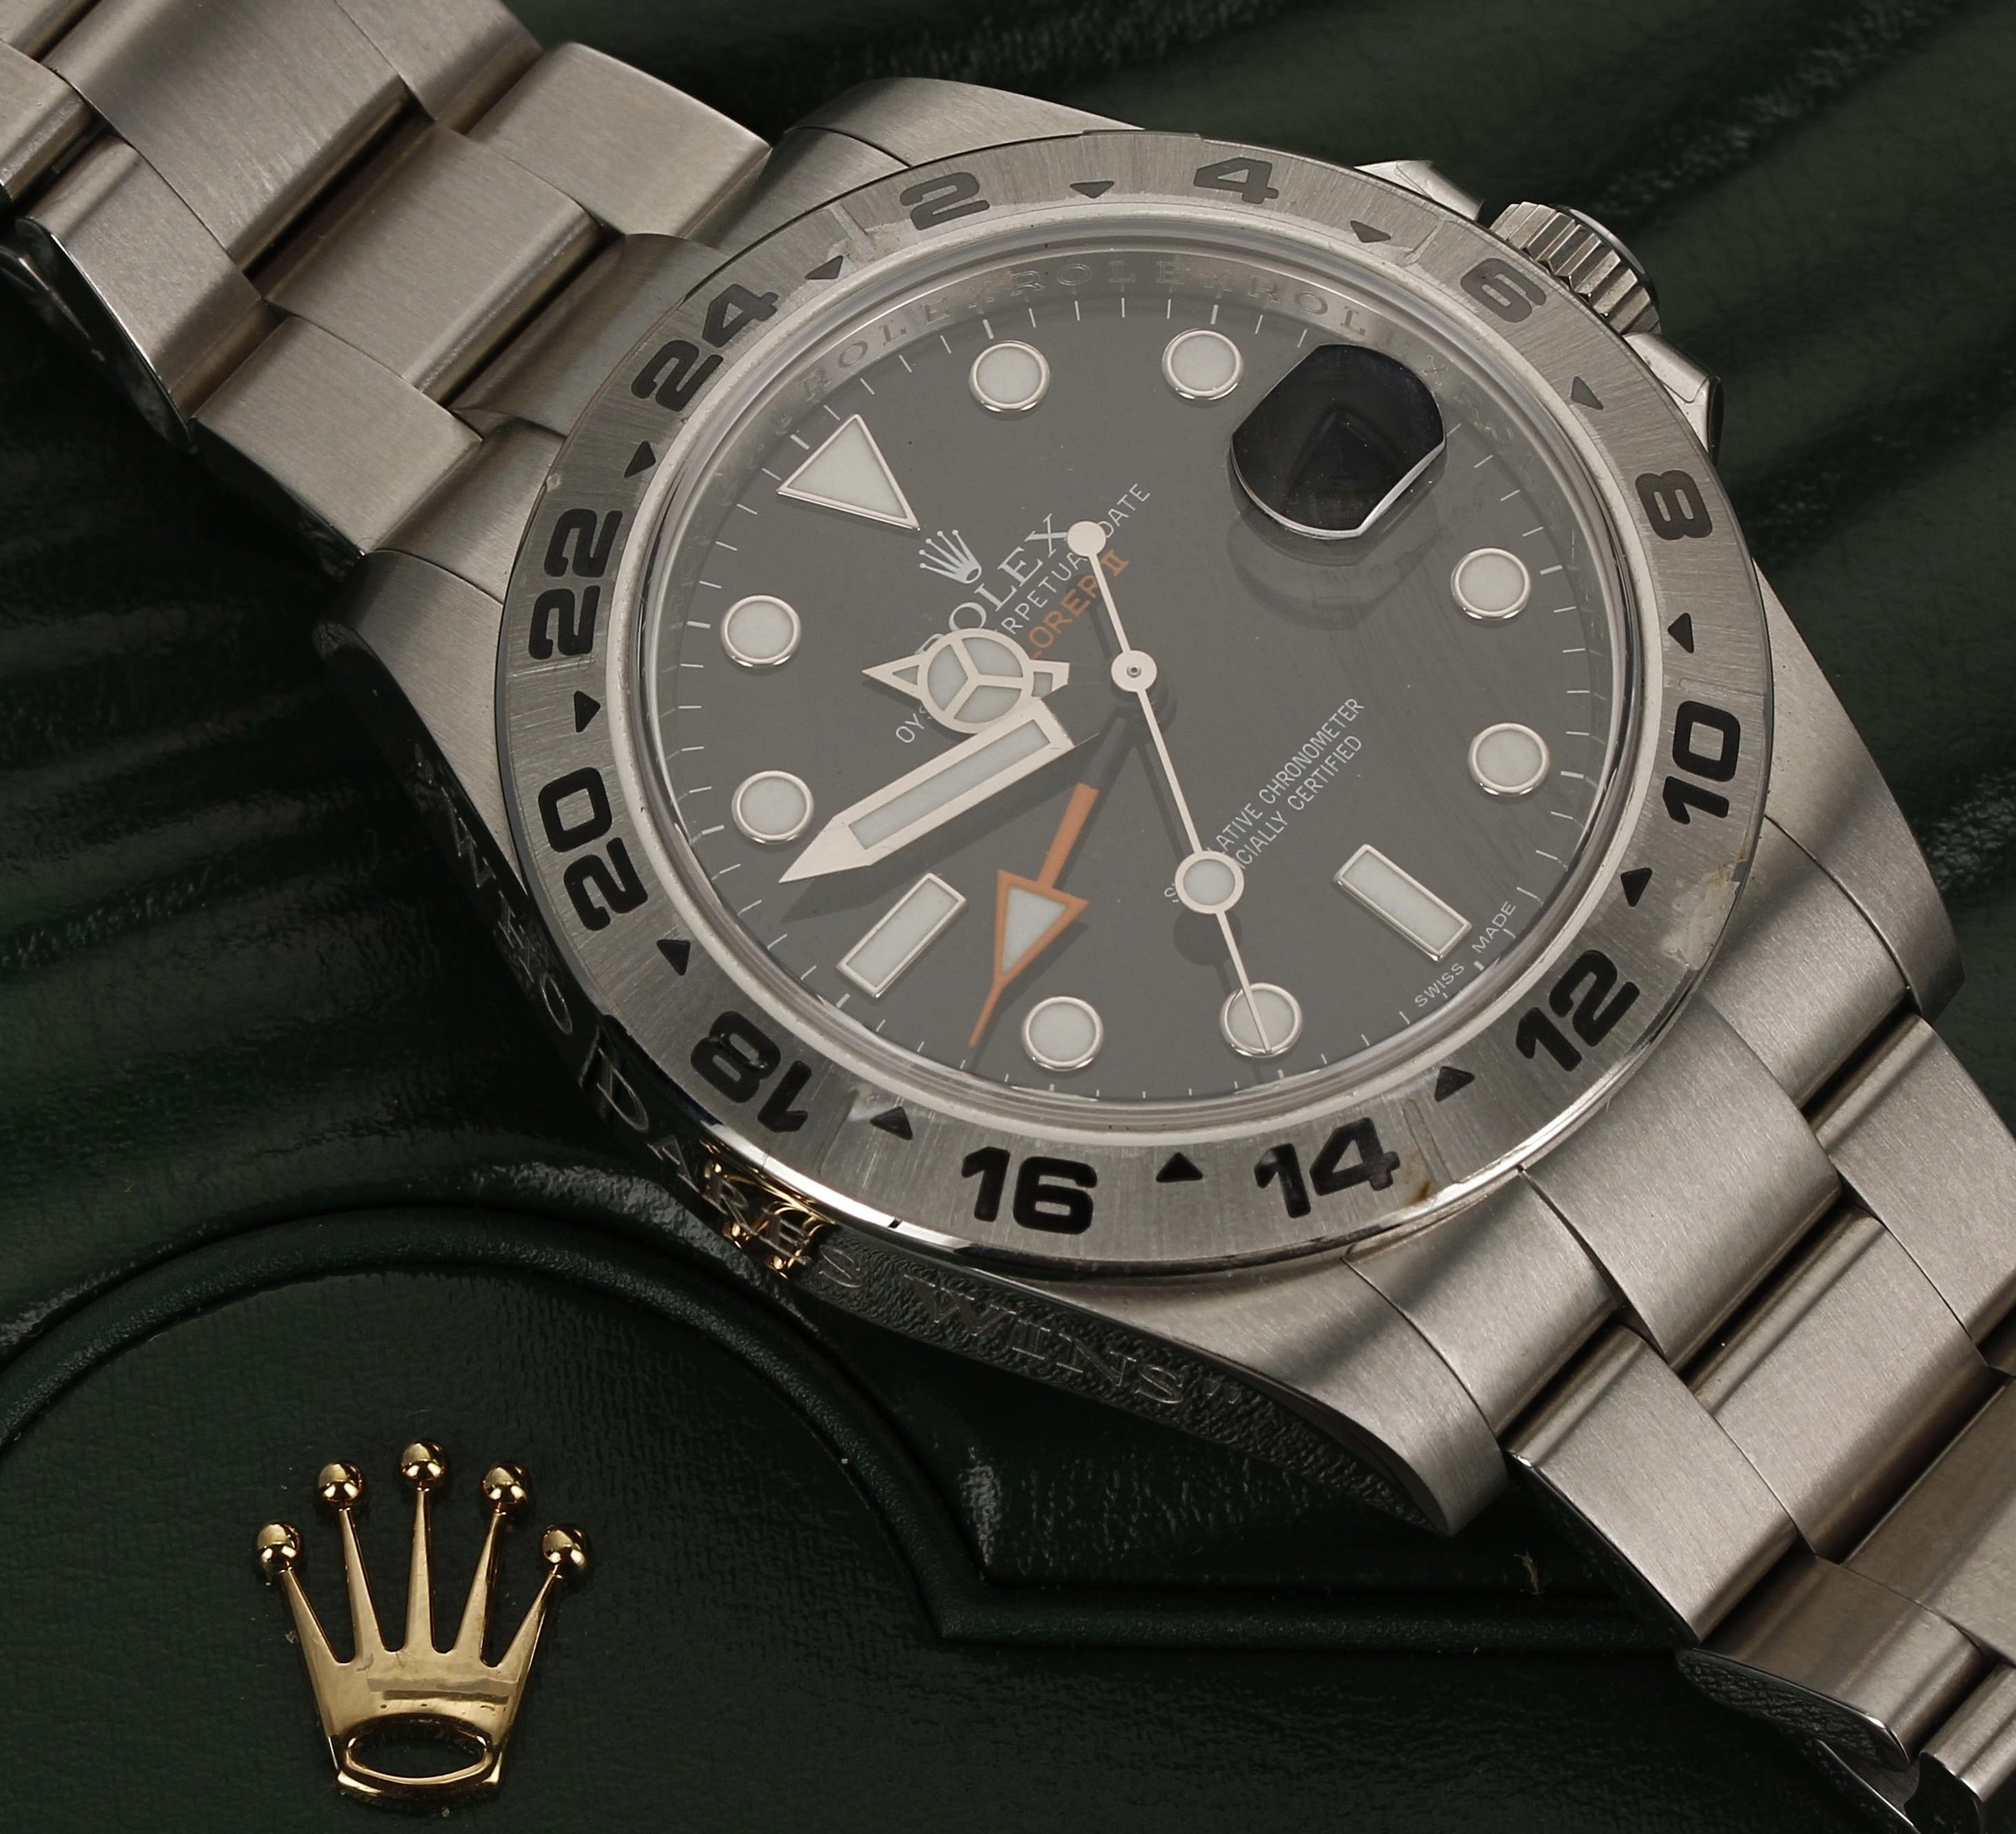 Rare Special Edition Military Commissioned Rolex Oyster Perpetual Date ‘SAS’ Explorer II stainless - Image 9 of 11